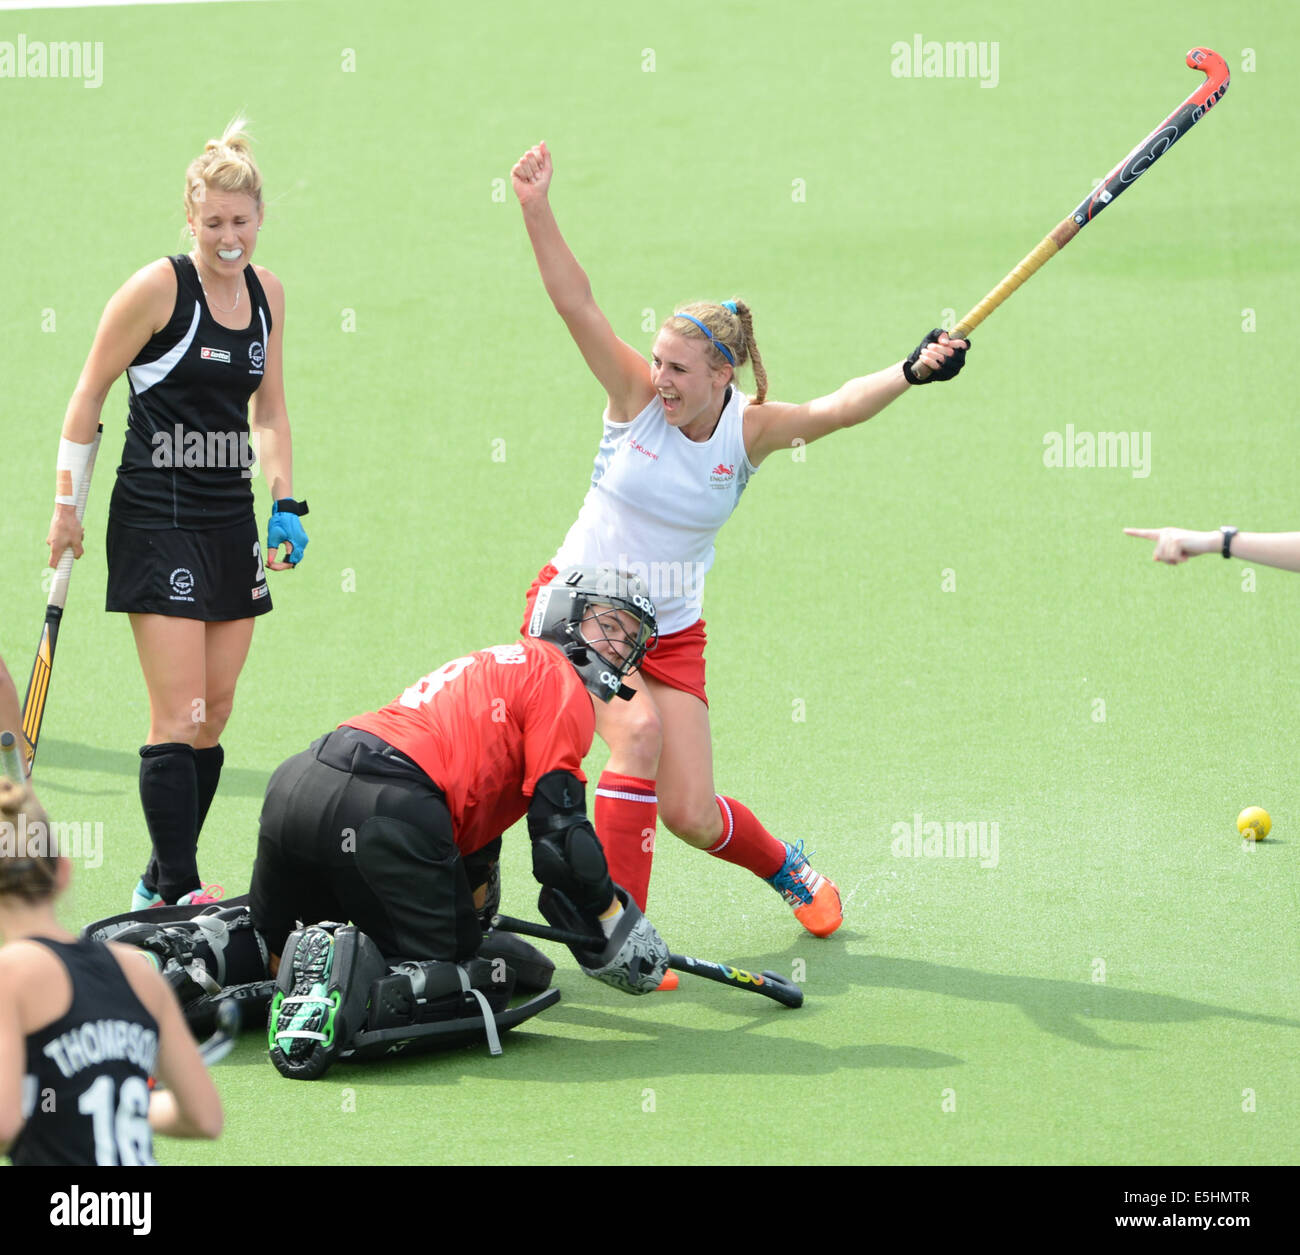 Glasgow, Scotland, UK. 1st Aug, 2014. England's Lily Owsley scores for England in their Commonwealth Games's semi-final against New Zealand in the Women's hockey competition on August 1st, 2014 at the National Hockey Stadium in Glasgow, Scotland Credit:  Martin Bateman/Alamy Live News Stock Photo